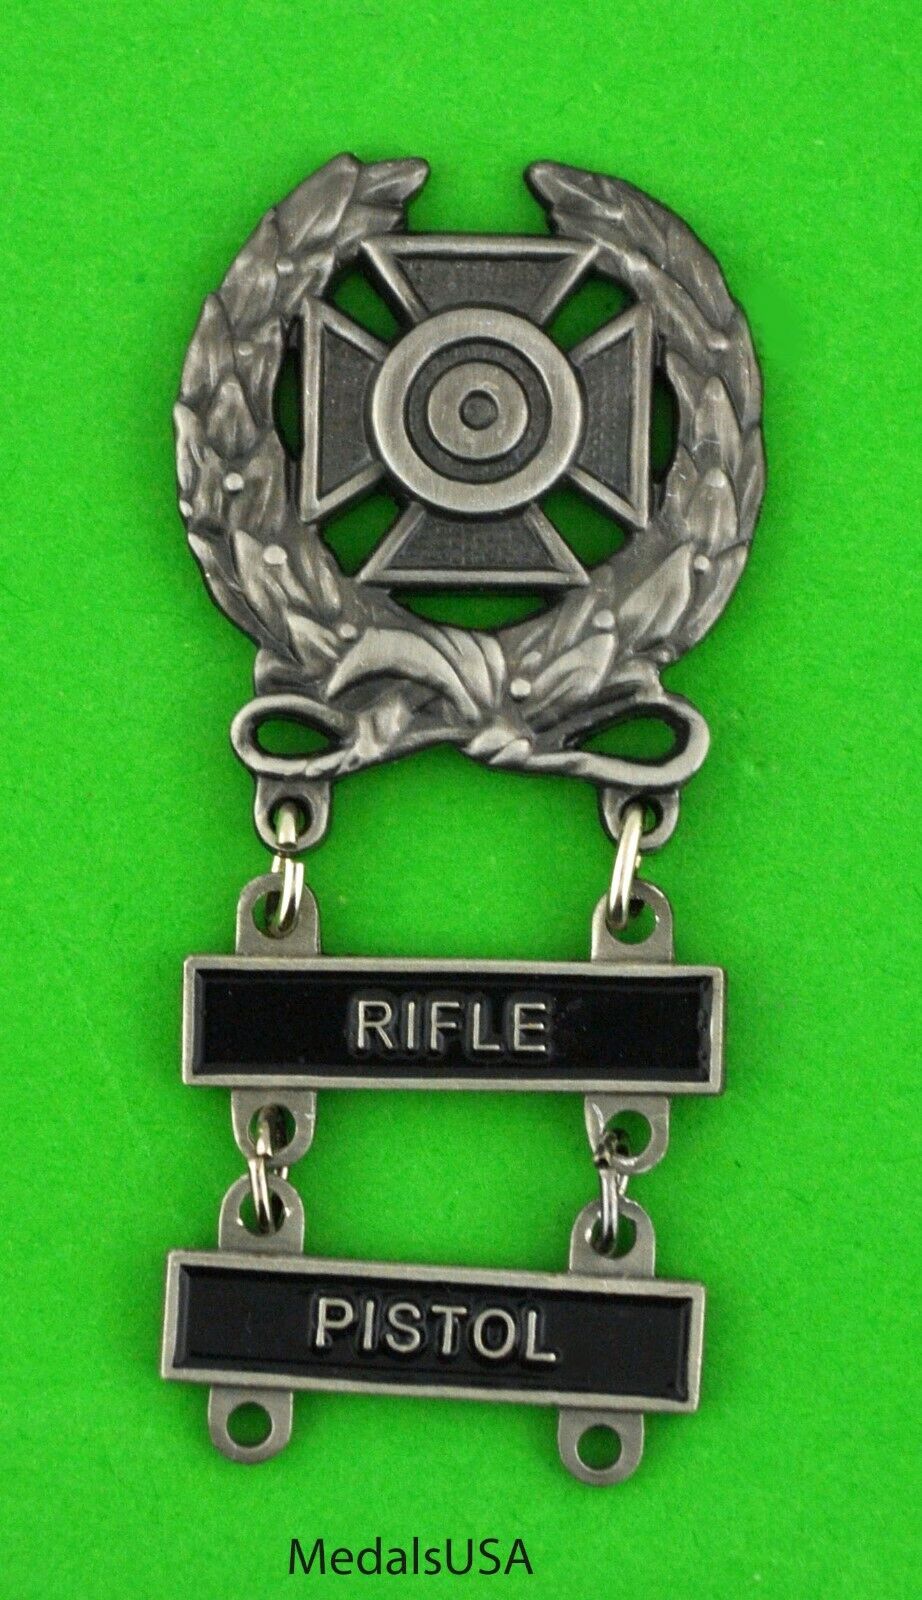 Army Expert Marksmanship Badge with RIFLE & PISTOL Qualification Tab Bars